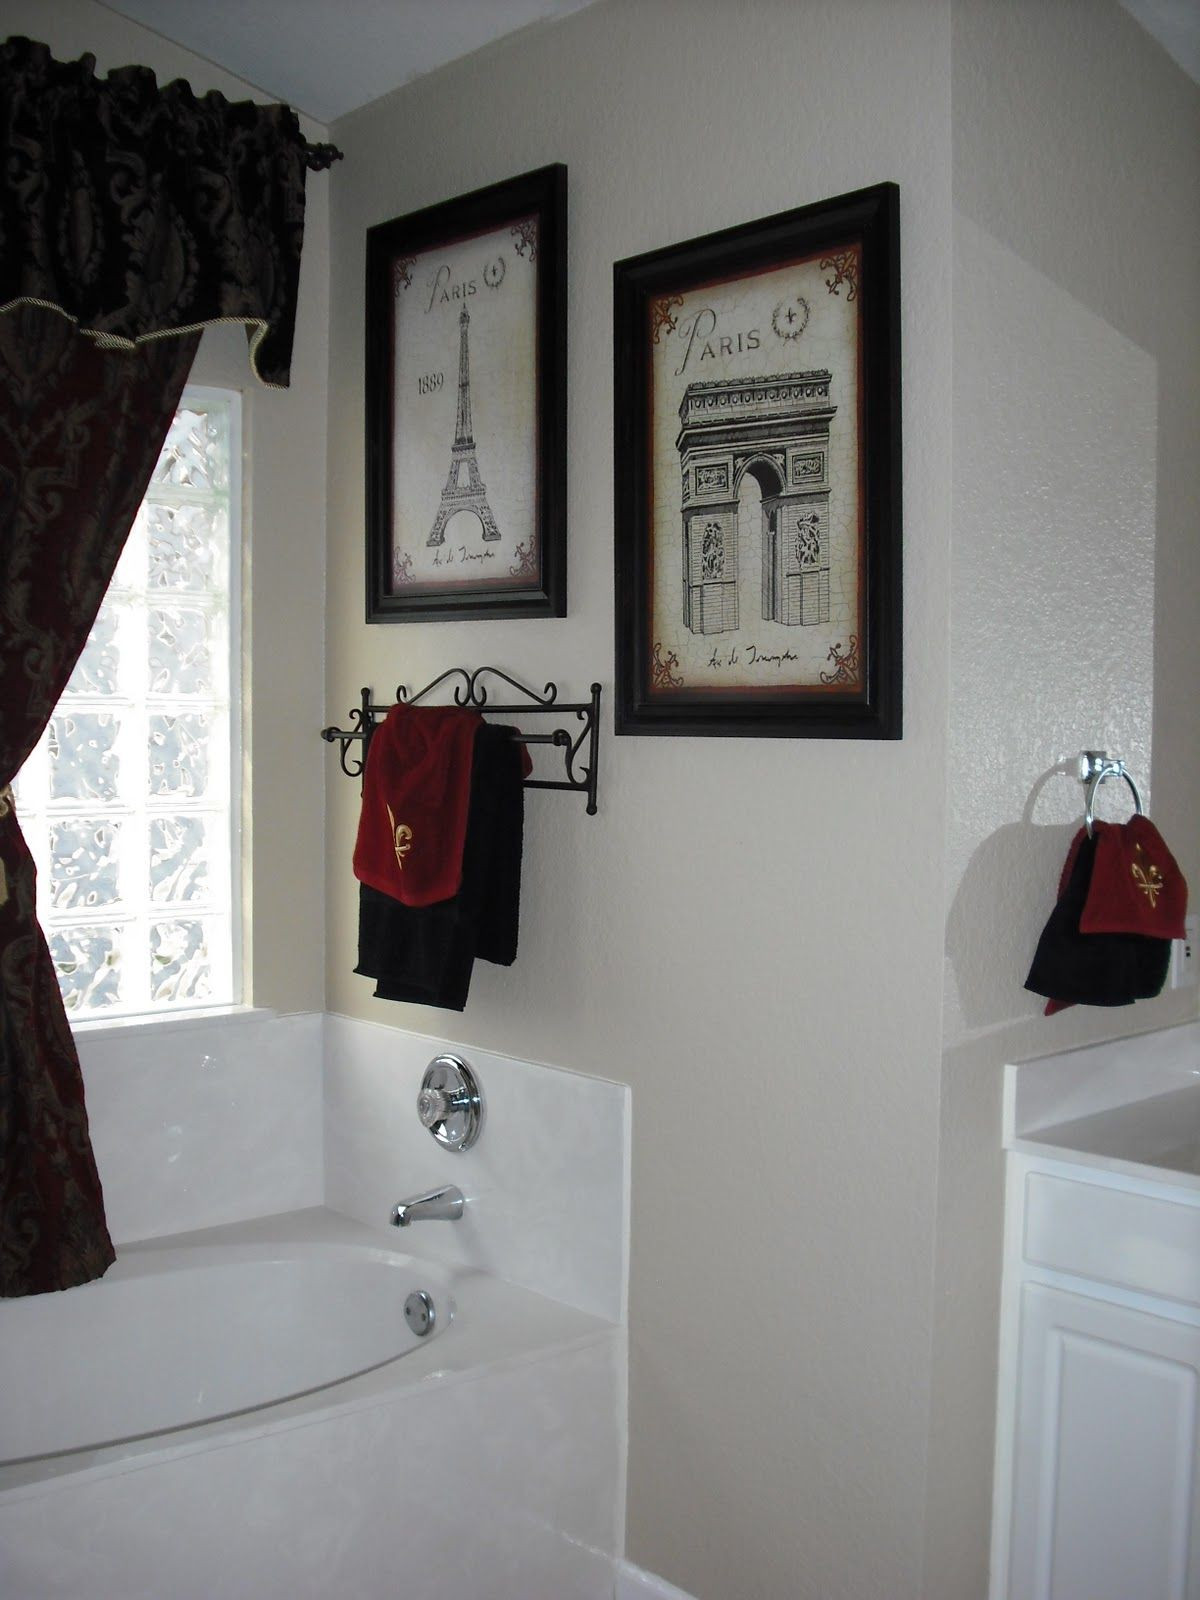 Paris Themed Bathroom Decor
 Exactly what I want for master bath Black and white Paris